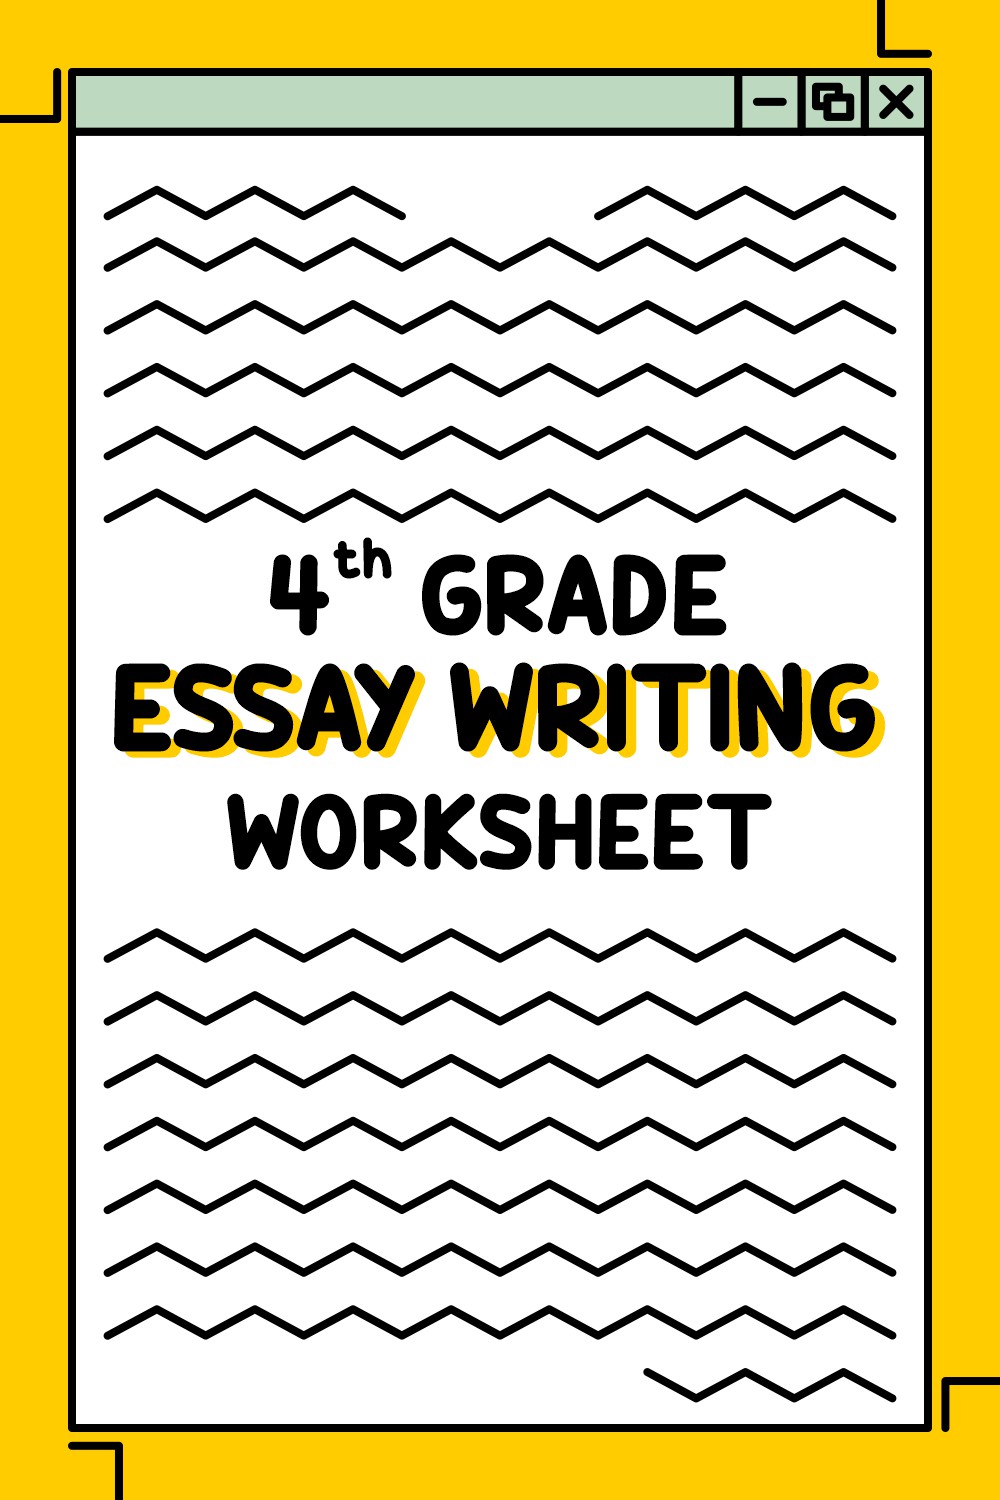 18 Images of 4th Grade Essay Writing Worksheets